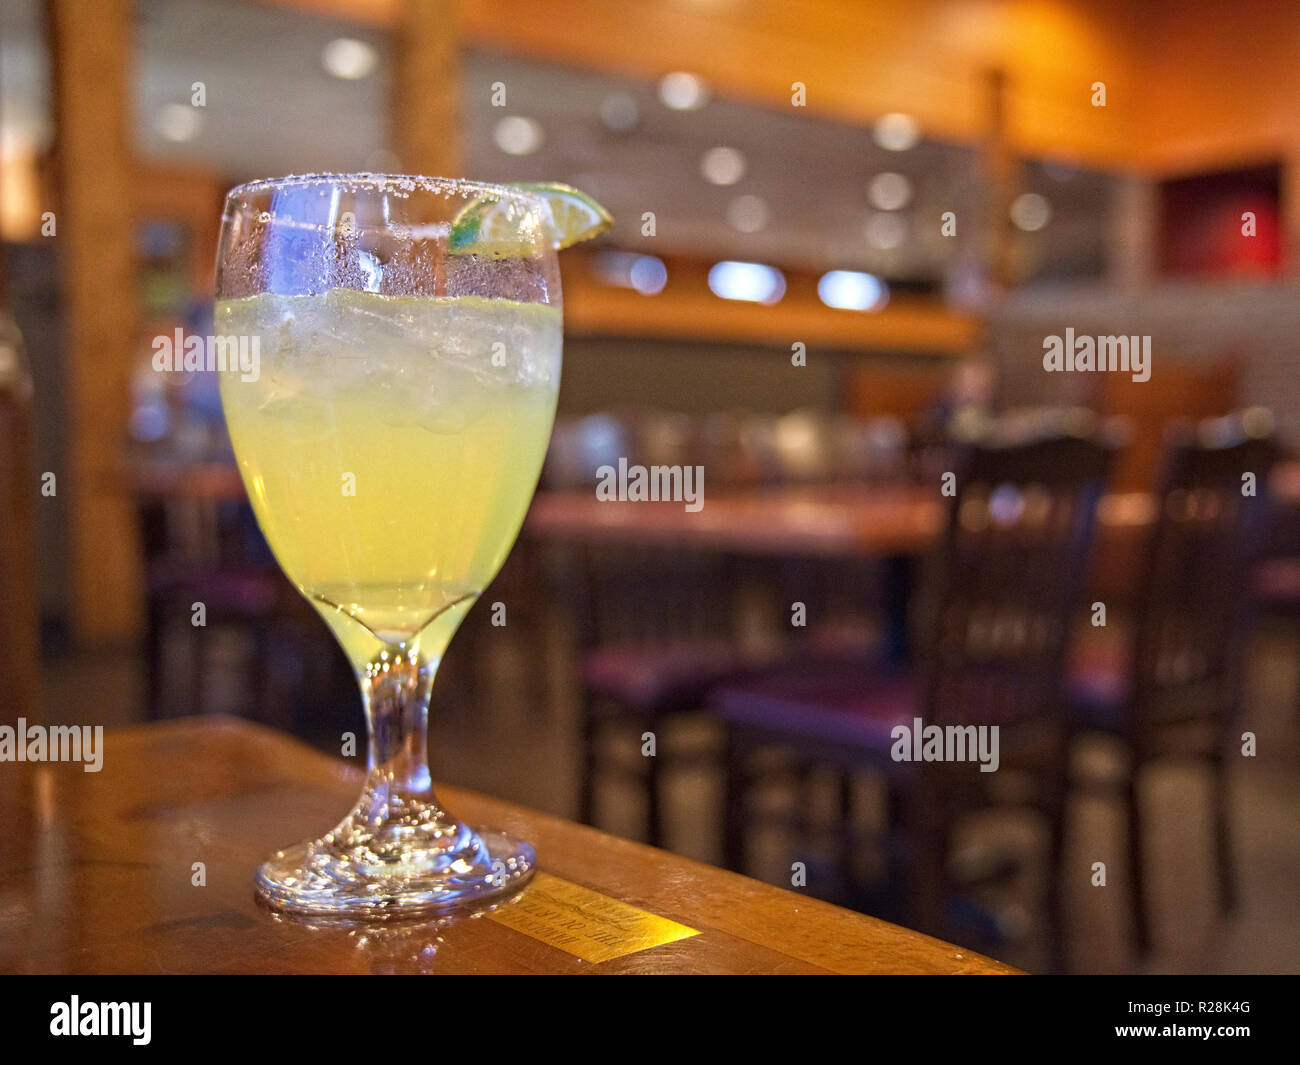 Fresh Mexican Margarita cocktail drink on a restaurant or bar table. Stock Photo